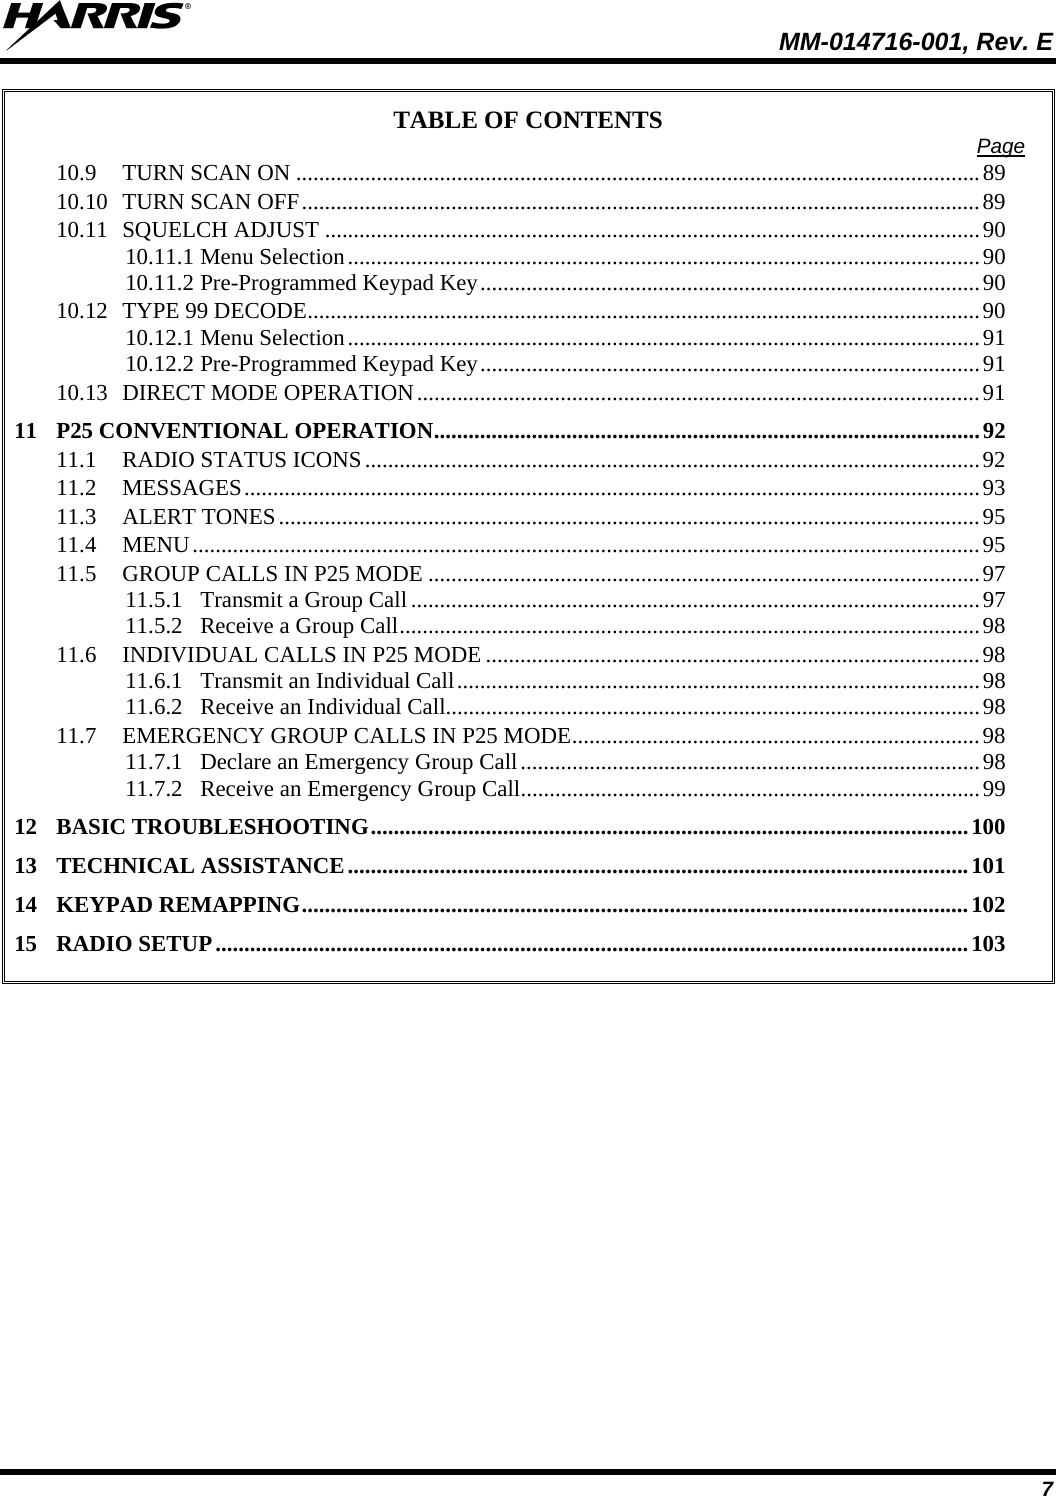  MM-014716-001, Rev. E 7 TABLE OF CONTENTS  Page 10.9 TURN SCAN ON .......................................................................................................................89 10.10 TURN SCAN OFF......................................................................................................................89 10.11 SQUELCH ADJUST ..................................................................................................................90 10.11.1 Menu Selection..............................................................................................................90 10.11.2 Pre-Programmed Keypad Key.......................................................................................90 10.12 TYPE 99 DECODE.....................................................................................................................90 10.12.1 Menu Selection..............................................................................................................91 10.12.2 Pre-Programmed Keypad Key.......................................................................................91 10.13 DIRECT MODE OPERATION..................................................................................................91 11 P25 CONVENTIONAL OPERATION...............................................................................................92 11.1 RADIO STATUS ICONS...........................................................................................................92 11.2 MESSAGES................................................................................................................................93 11.3 ALERT TONES..........................................................................................................................95 11.4 MENU.........................................................................................................................................95 11.5 GROUP CALLS IN P25 MODE ................................................................................................97 11.5.1 Transmit a Group Call...................................................................................................97 11.5.2 Receive a Group Call.....................................................................................................98 11.6 INDIVIDUAL CALLS IN P25 MODE ......................................................................................98 11.6.1 Transmit an Individual Call...........................................................................................98 11.6.2 Receive an Individual Call.............................................................................................98 11.7 EMERGENCY GROUP CALLS IN P25 MODE.......................................................................98 11.7.1 Declare an Emergency Group Call................................................................................98 11.7.2 Receive an Emergency Group Call................................................................................99 12 BASIC TROUBLESHOOTING........................................................................................................100 13 TECHNICAL ASSISTANCE............................................................................................................101 14 KEYPAD REMAPPING....................................................................................................................102 15 RADIO SETUP...................................................................................................................................103  